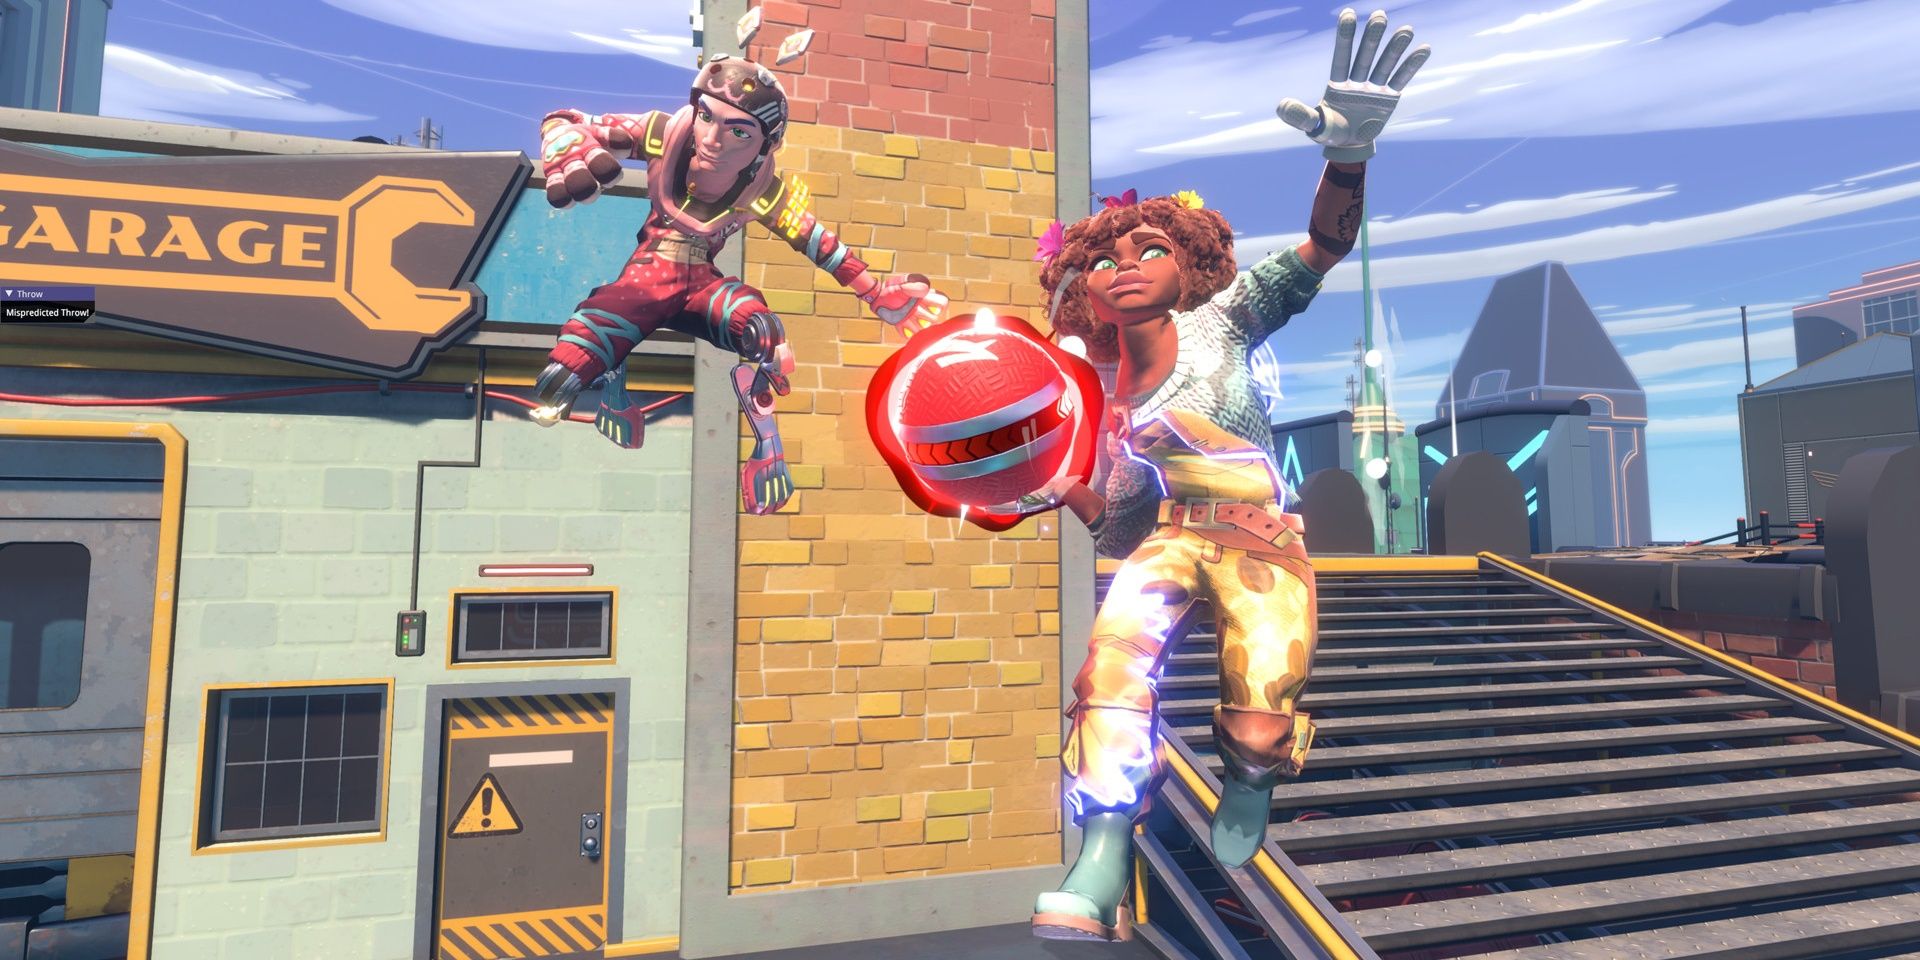 Two players in Knockout City, with one holding a dodgeball